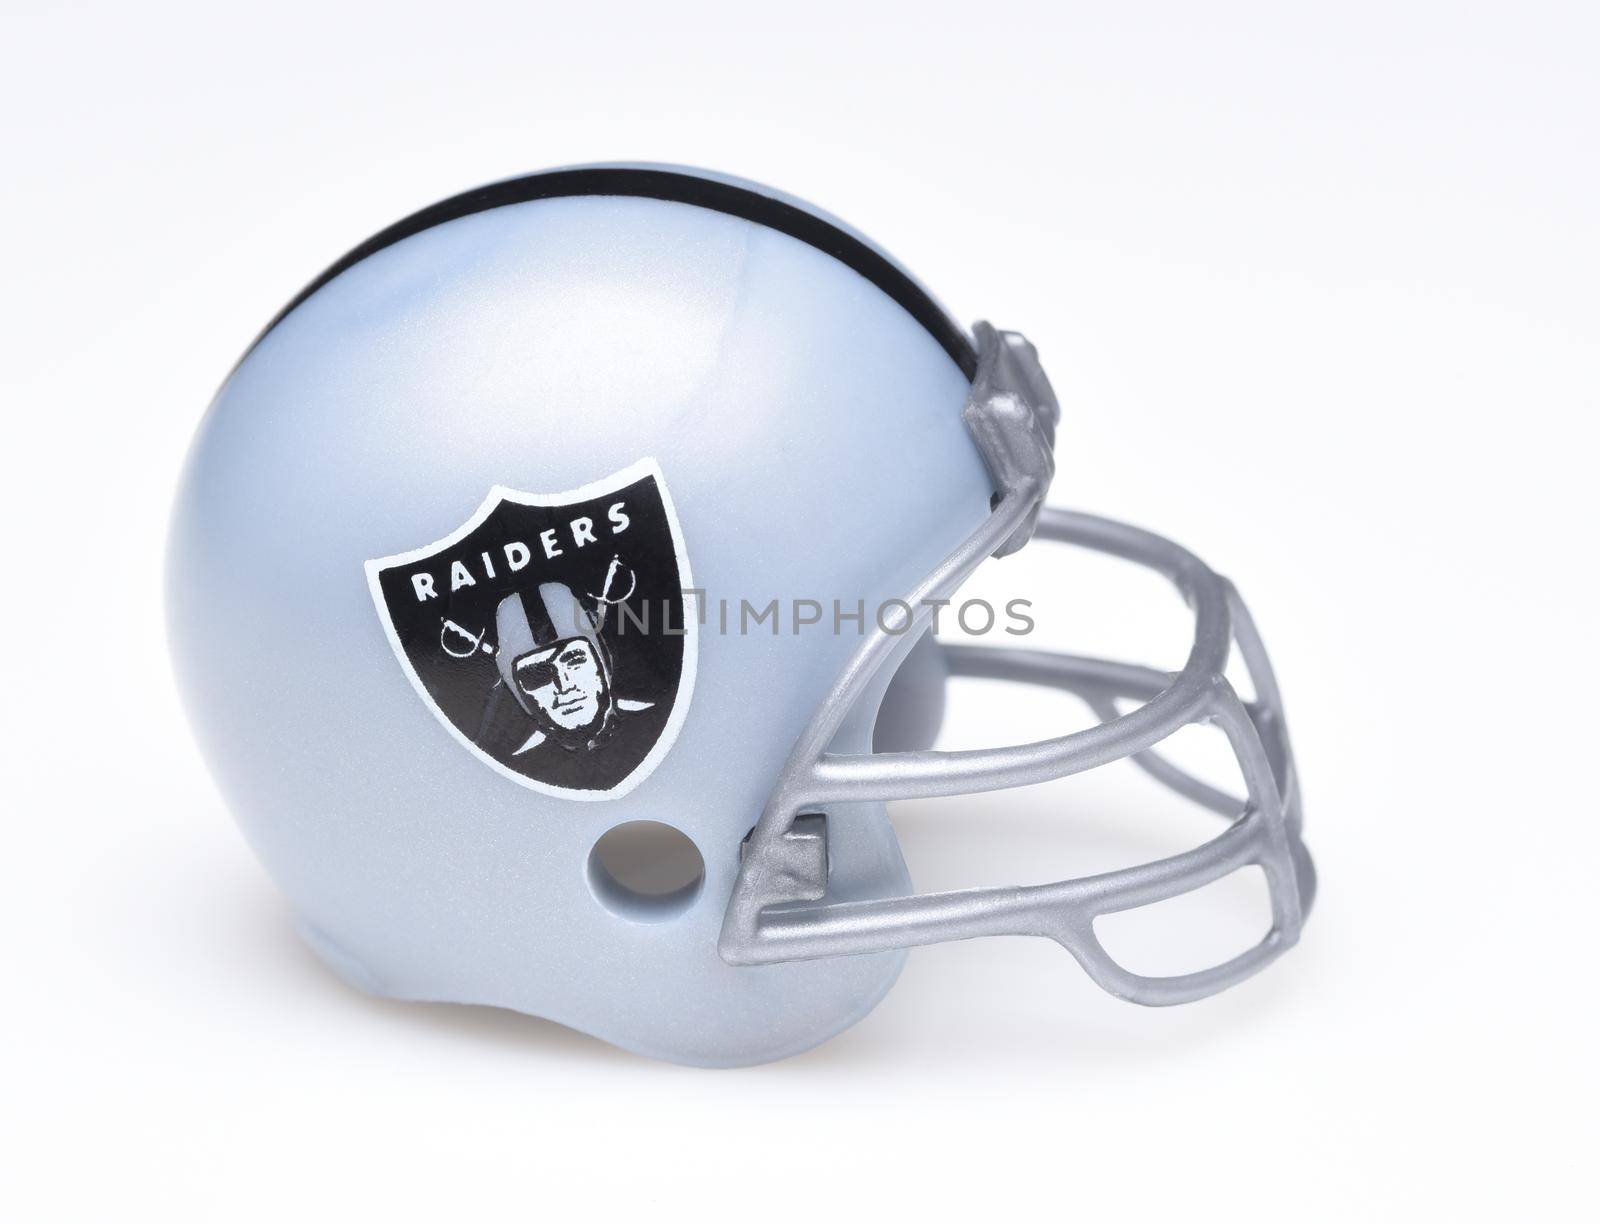 IRVINE, CALIFORNIA - AUGUST 30, 2018: Mini Collectable Football Helmet for the Oakland Raiders of the American Football Conference West. 